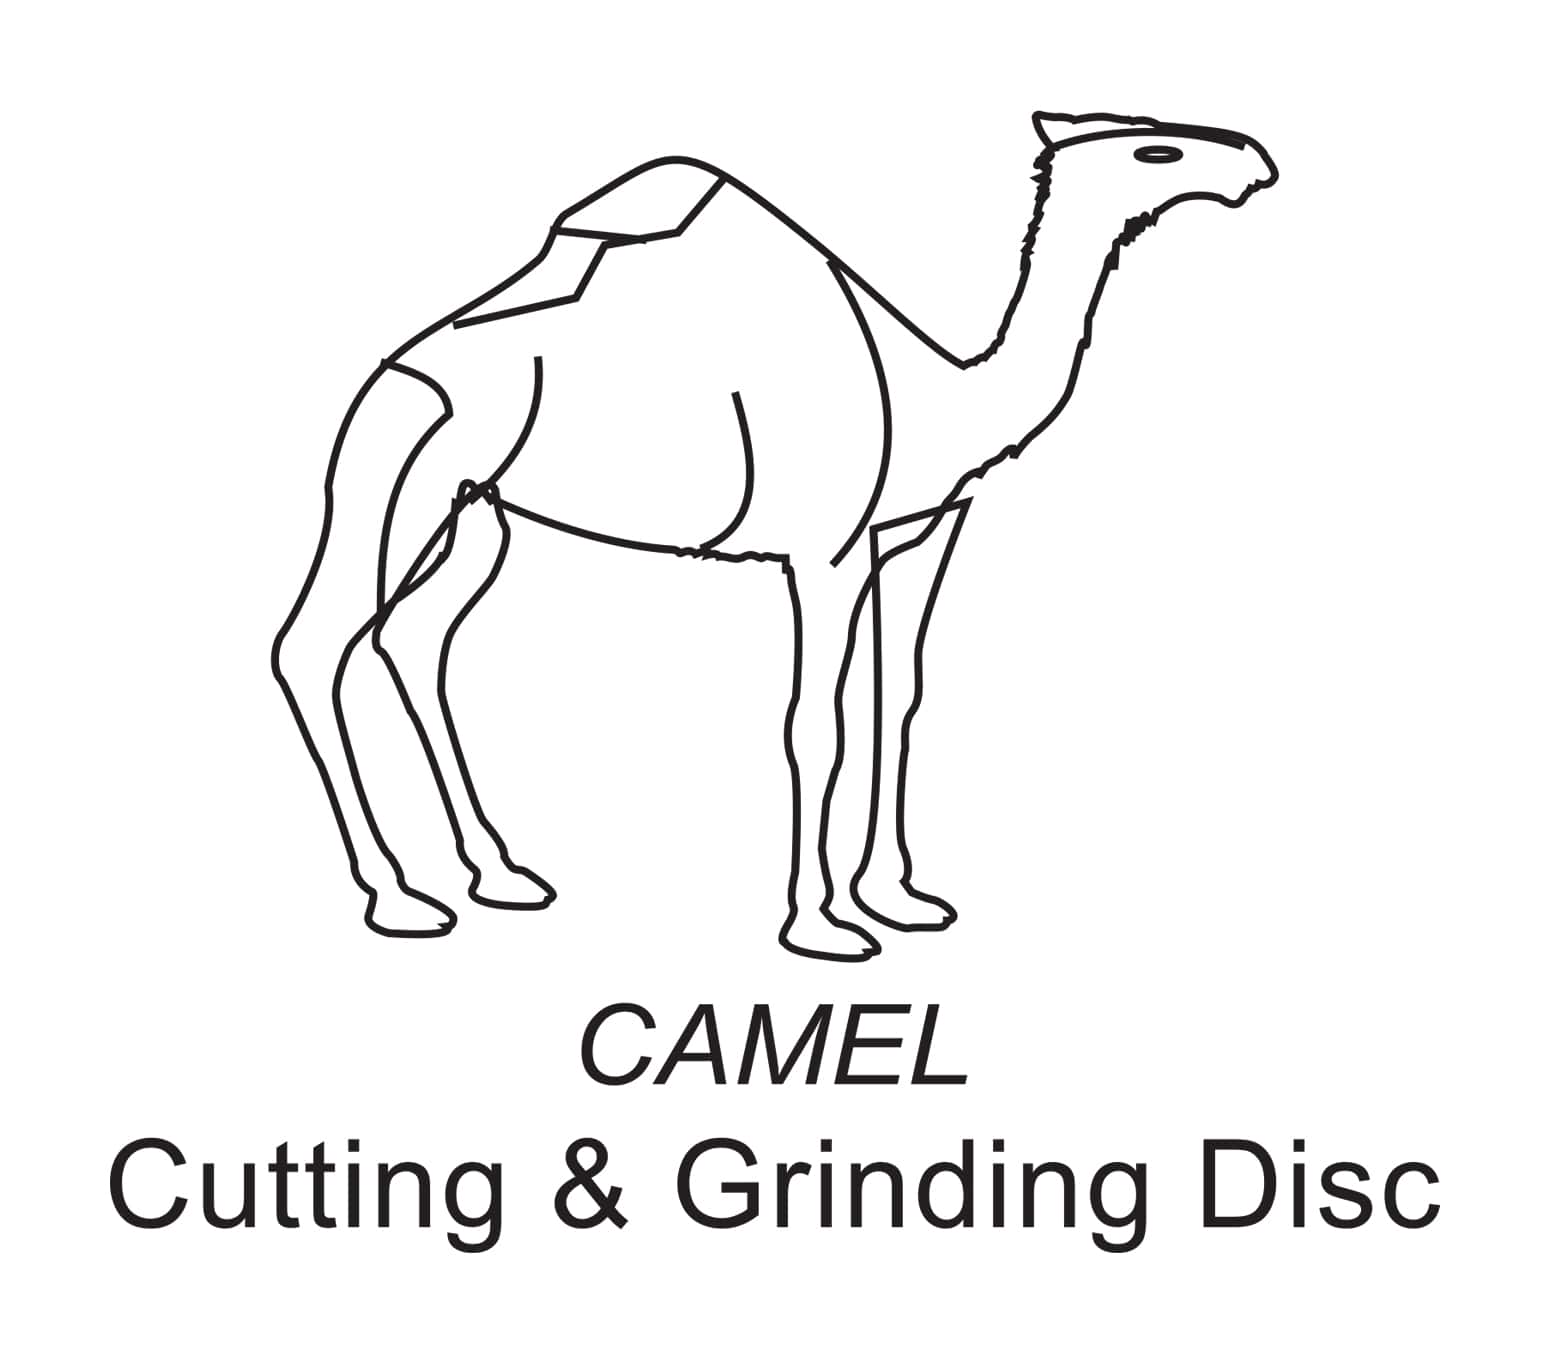 camel, cutting, grinding, discs, slovenia, swaty comet, weiler, abrasives, mild, stainless, steel, consumables, consumable